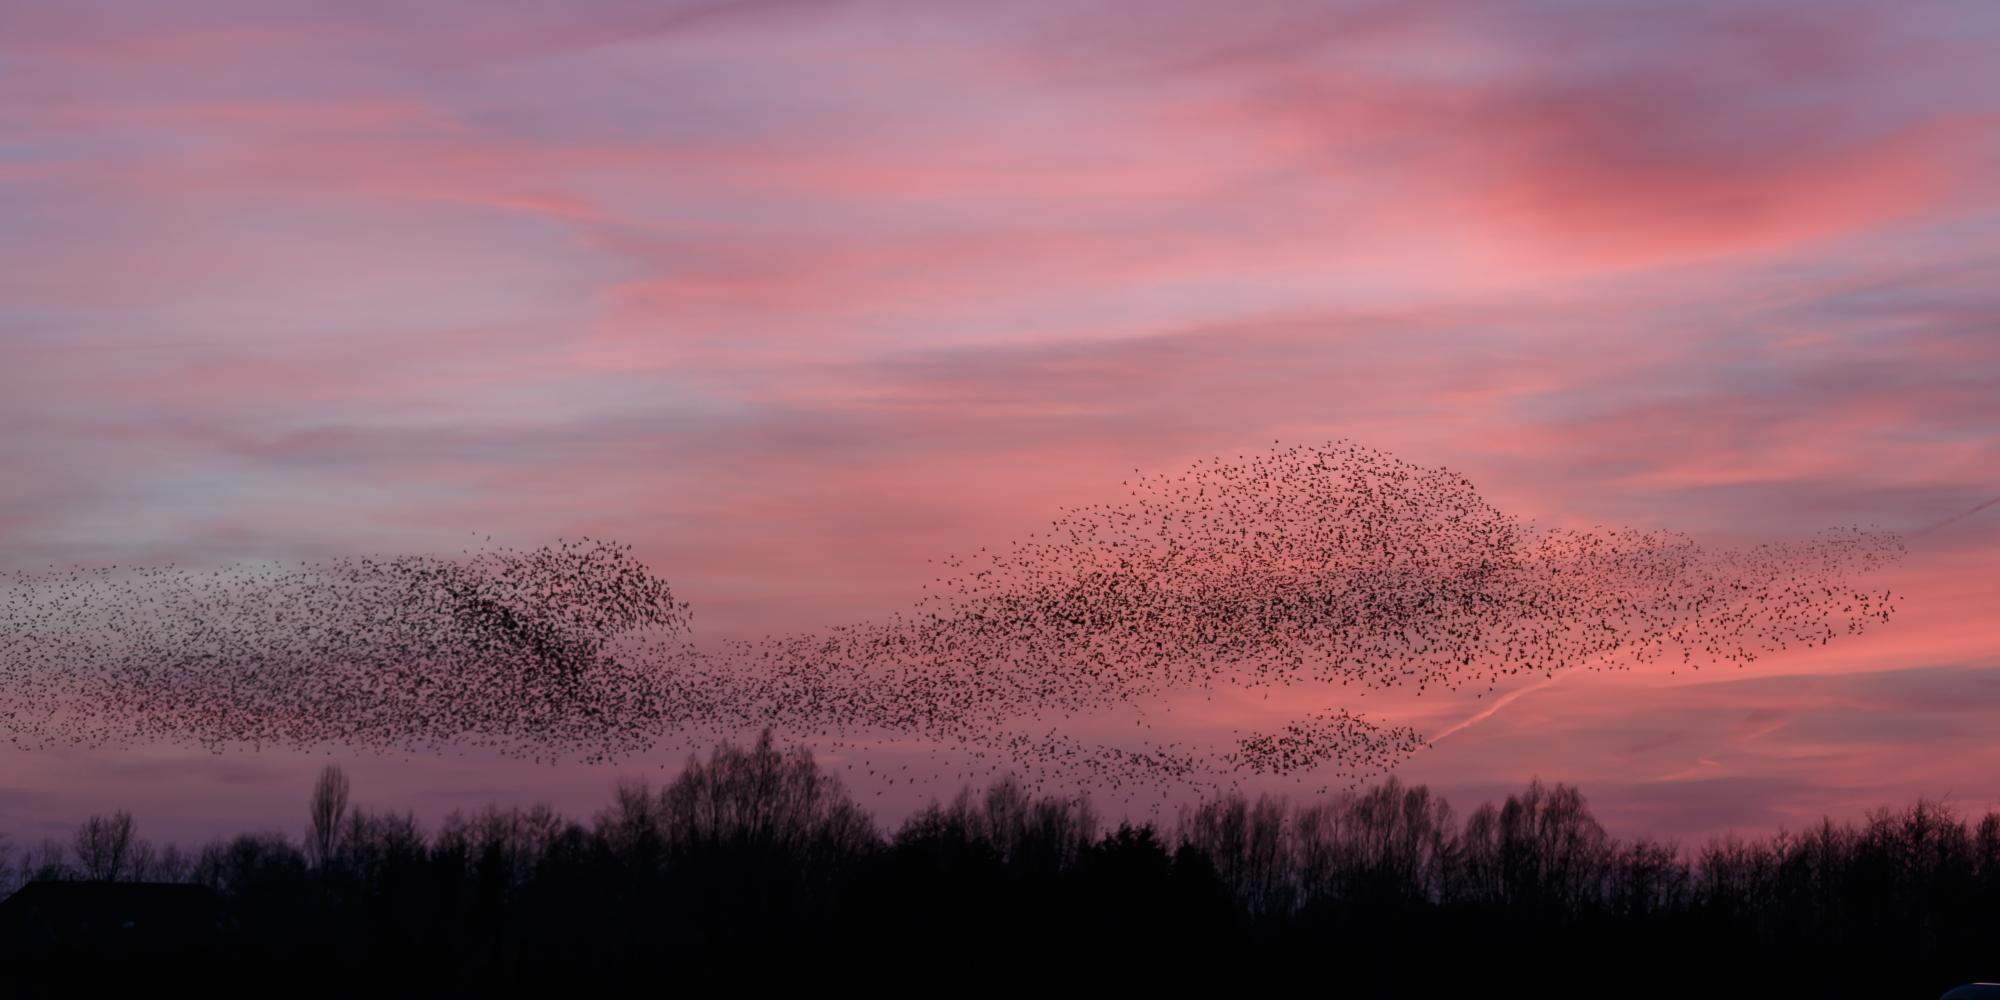 Murmuration of starlings at sunset over silhouetted trees - shutterstock credit